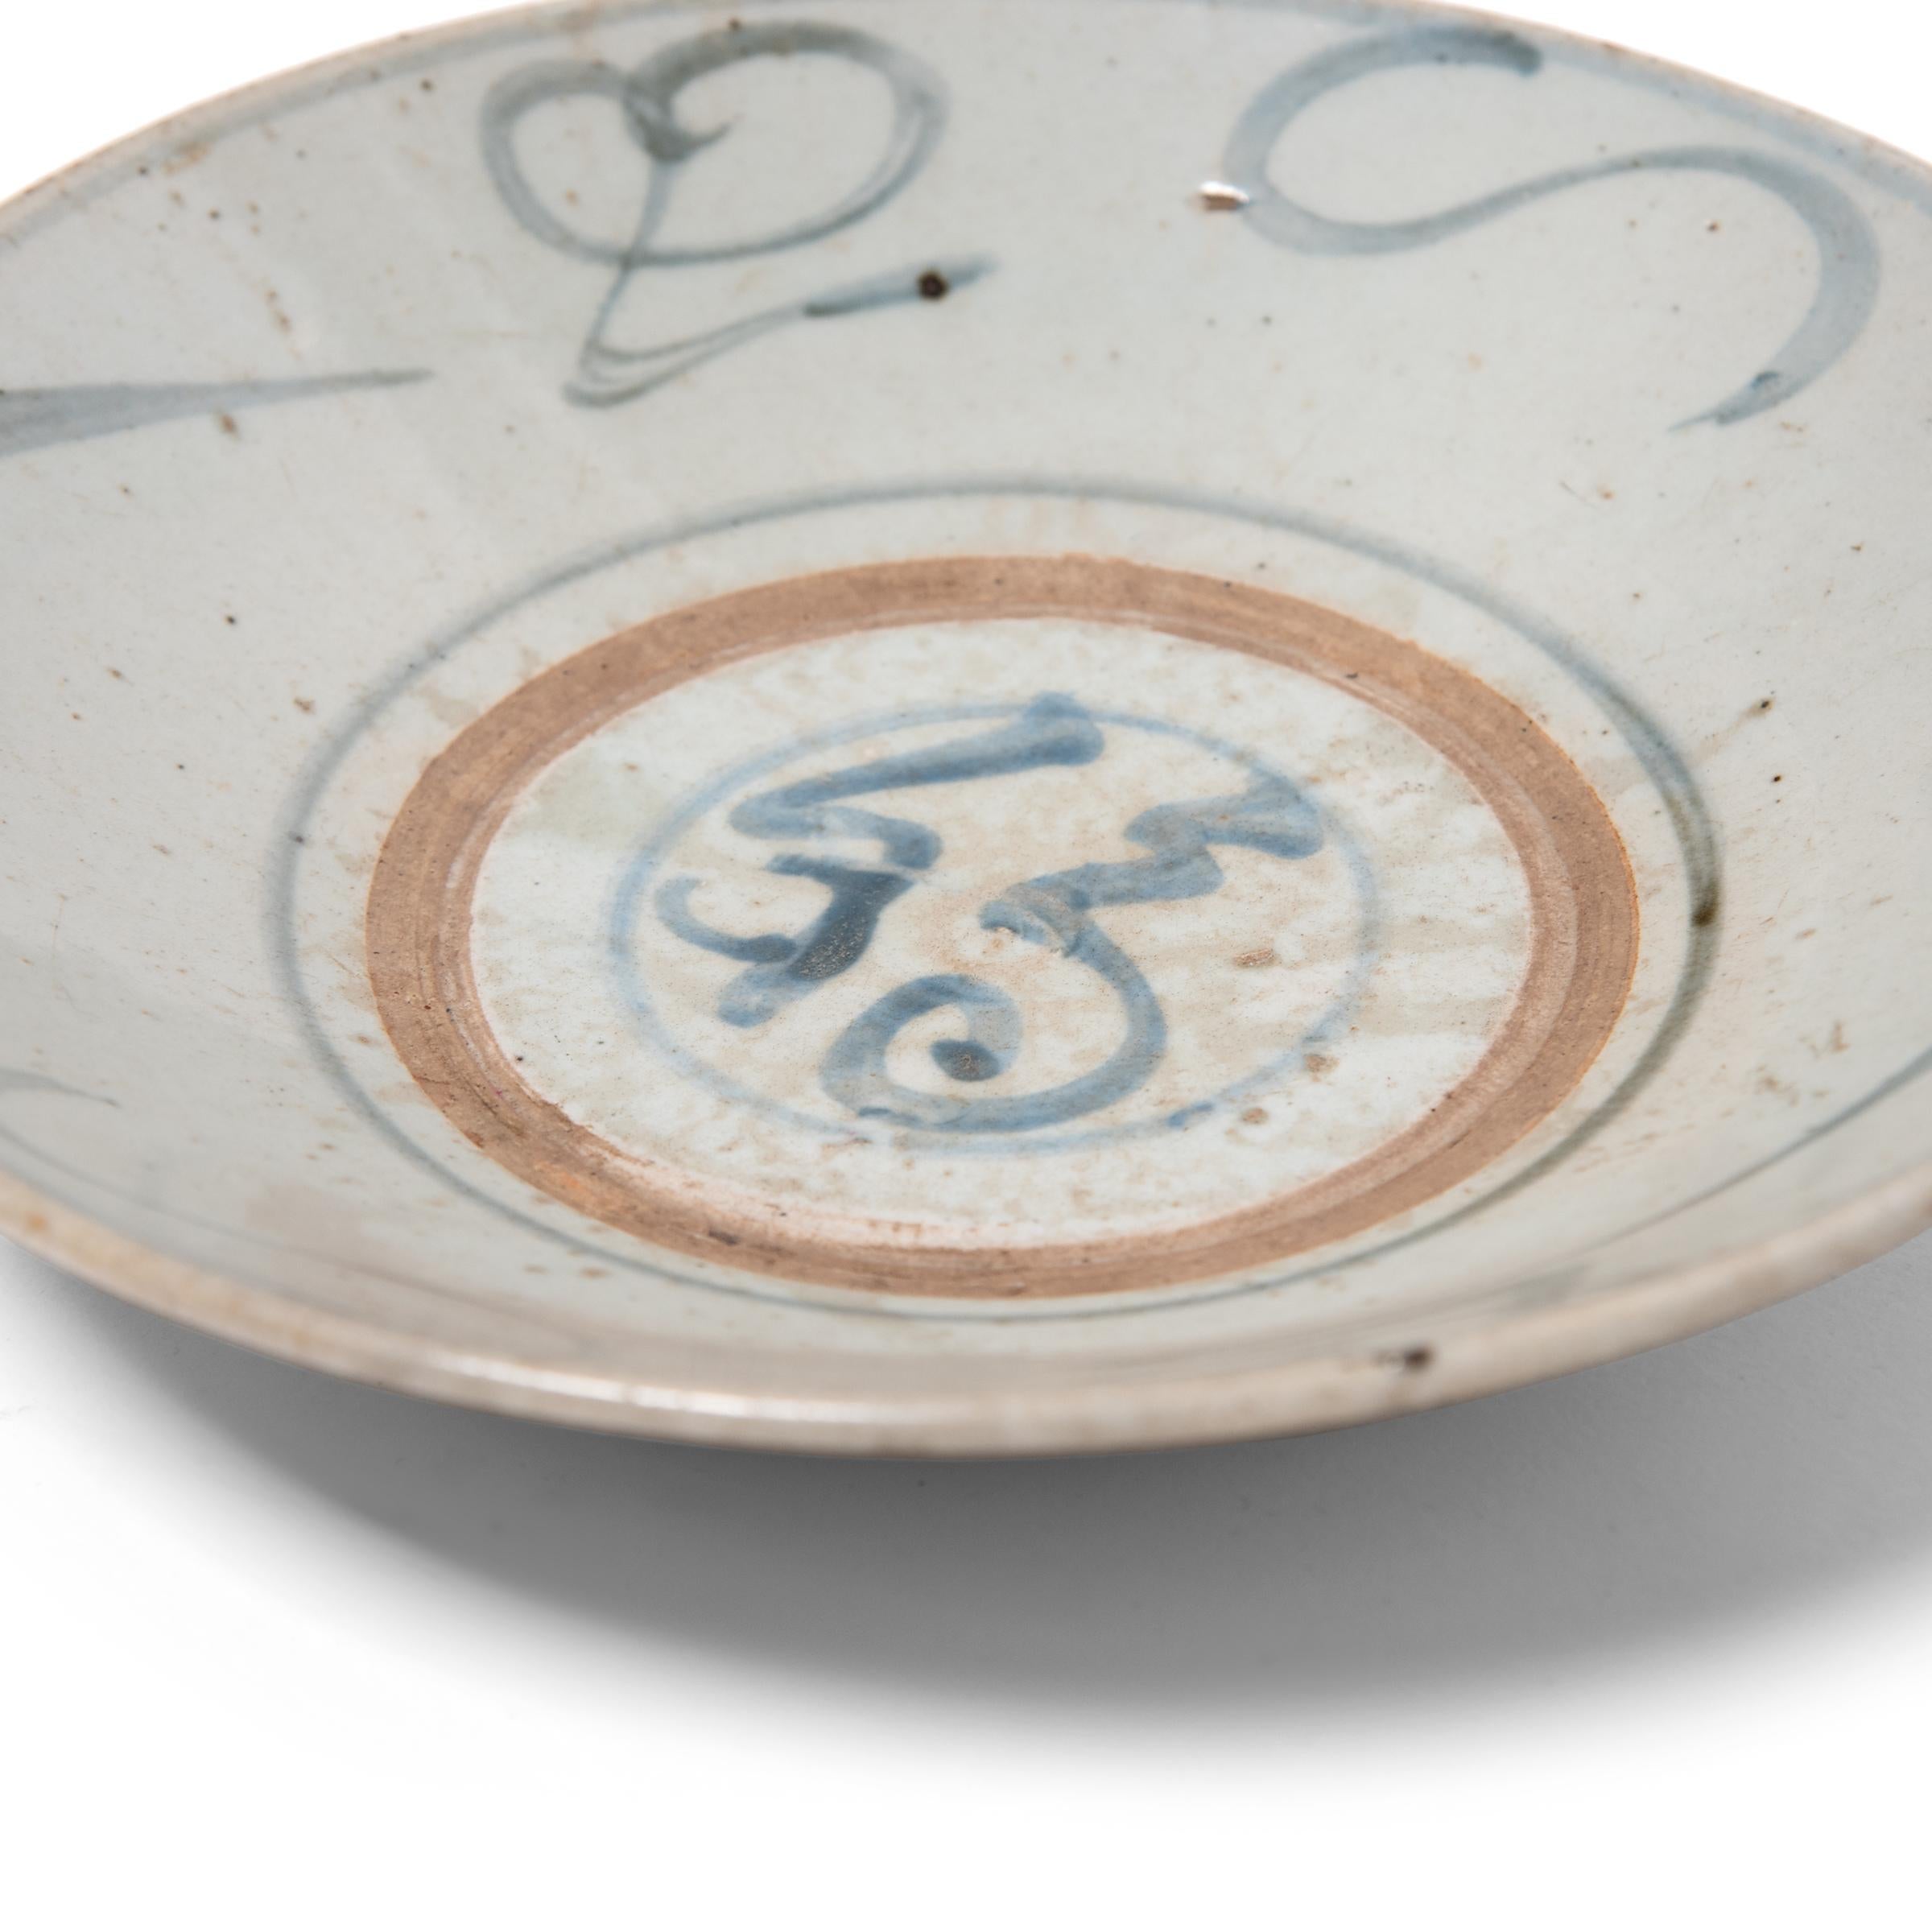 Calligraphic sweeps of blue bring this 19th century footed plate to life, brushed atop a blue-grey glaze that cloaks the simple ceramic form. Once used daily for tea, rice, and soup, this expressive example of Chinese blue and white ceramics can